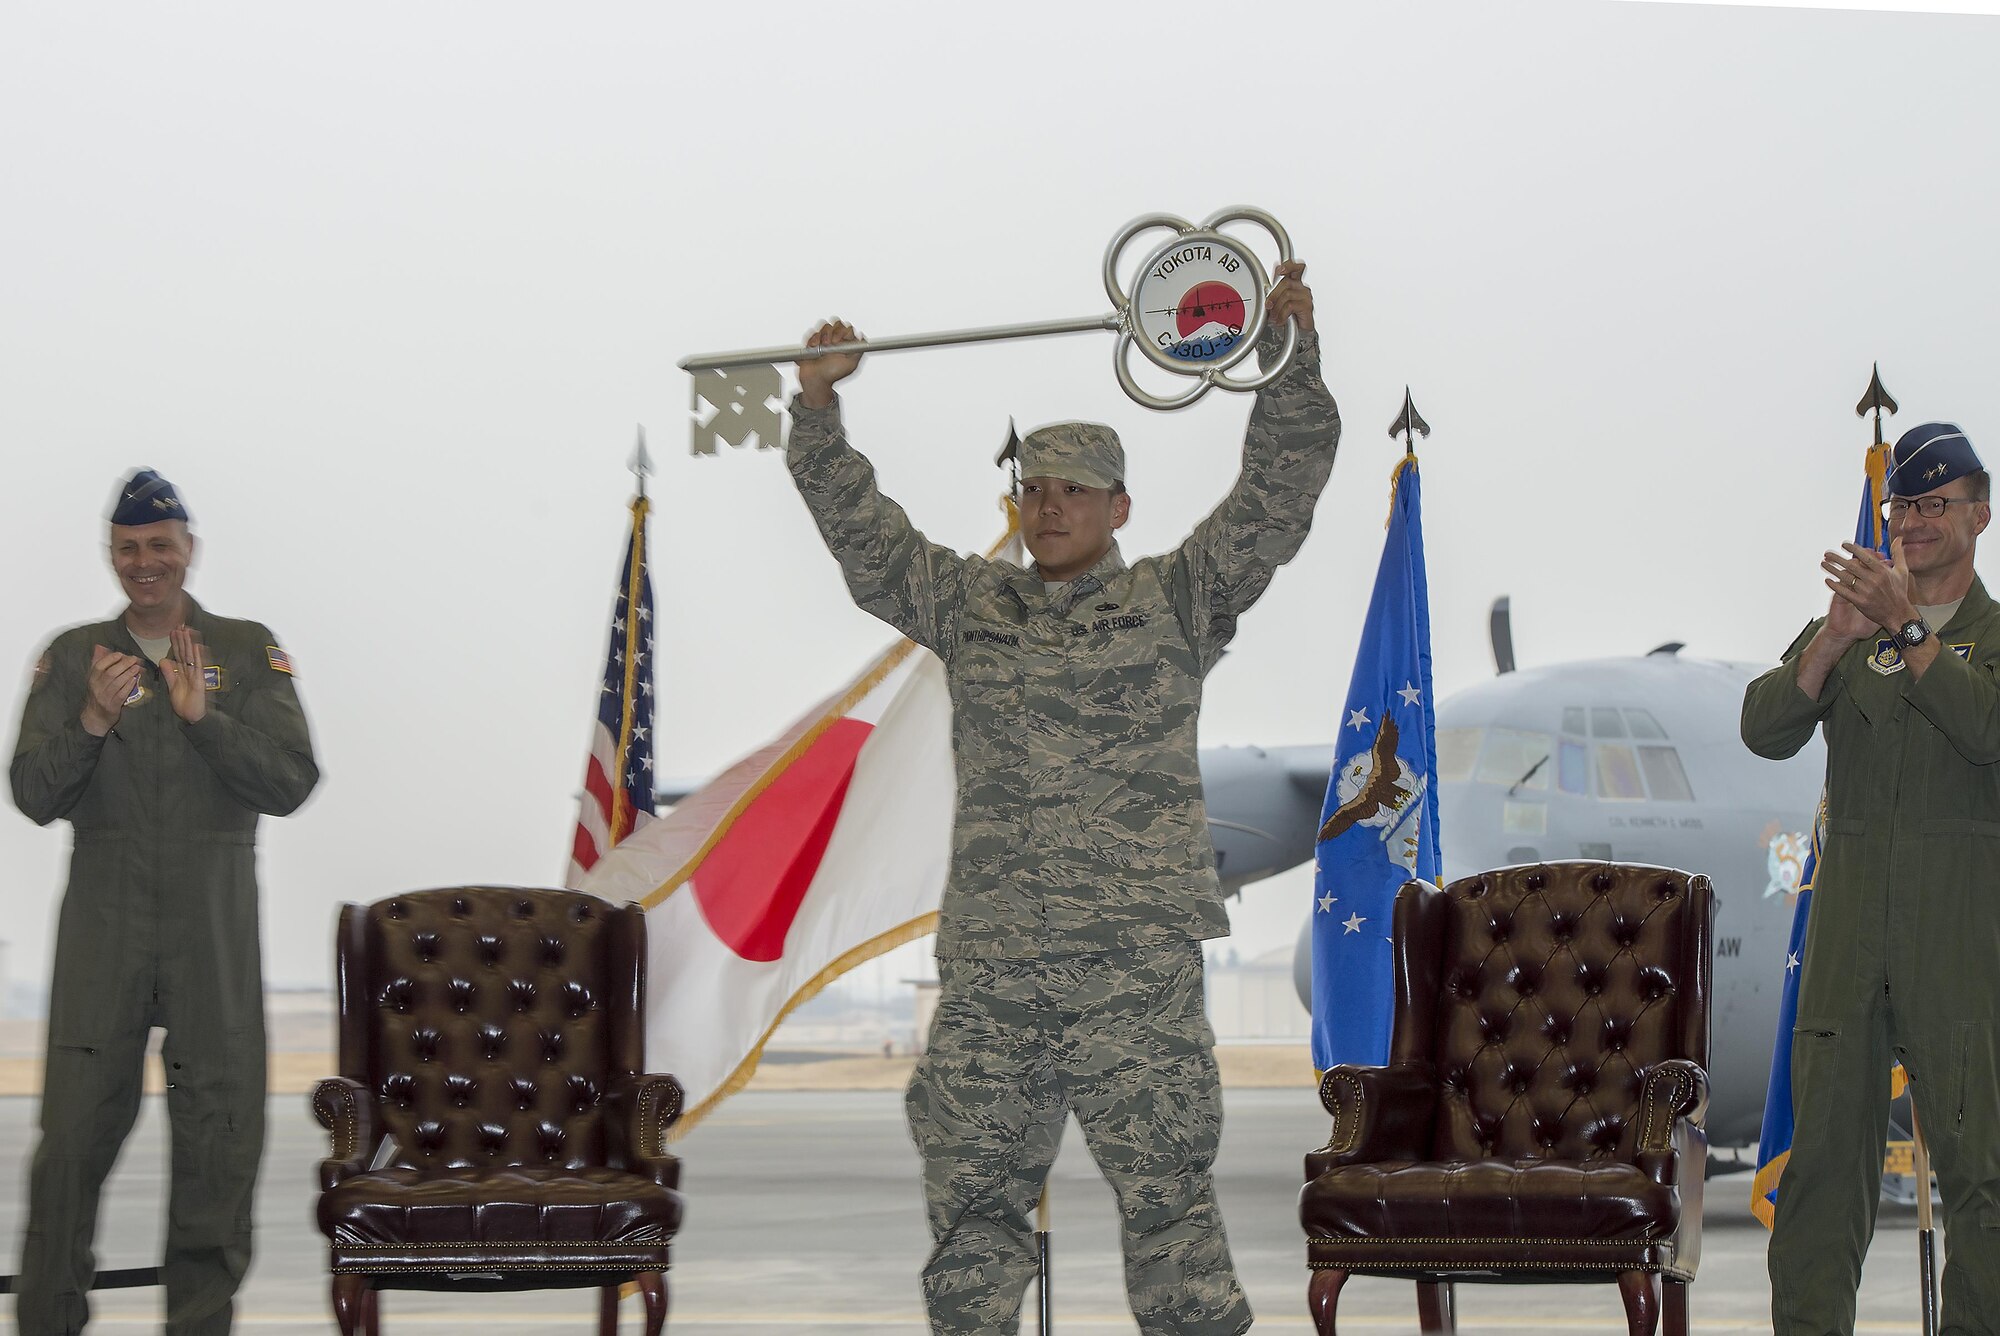 Staff Sgt. Gene Phonthipsavath, 374th Aircraft Maintenance Squadron dedicated crew chief, holds aloft the ceremonial key during a ceremony held to celebrate the arrival of the first C-130J Super Hercules assigned to Yokota Air Base, Japan, Mar. 6, 2017. The new aircraft is scheduled to have fully replaced the 374th Airlift Wing's C-130 Hercules fleet by 2018. (U.S. Air Force photo by Senior Airman David C. Danford)